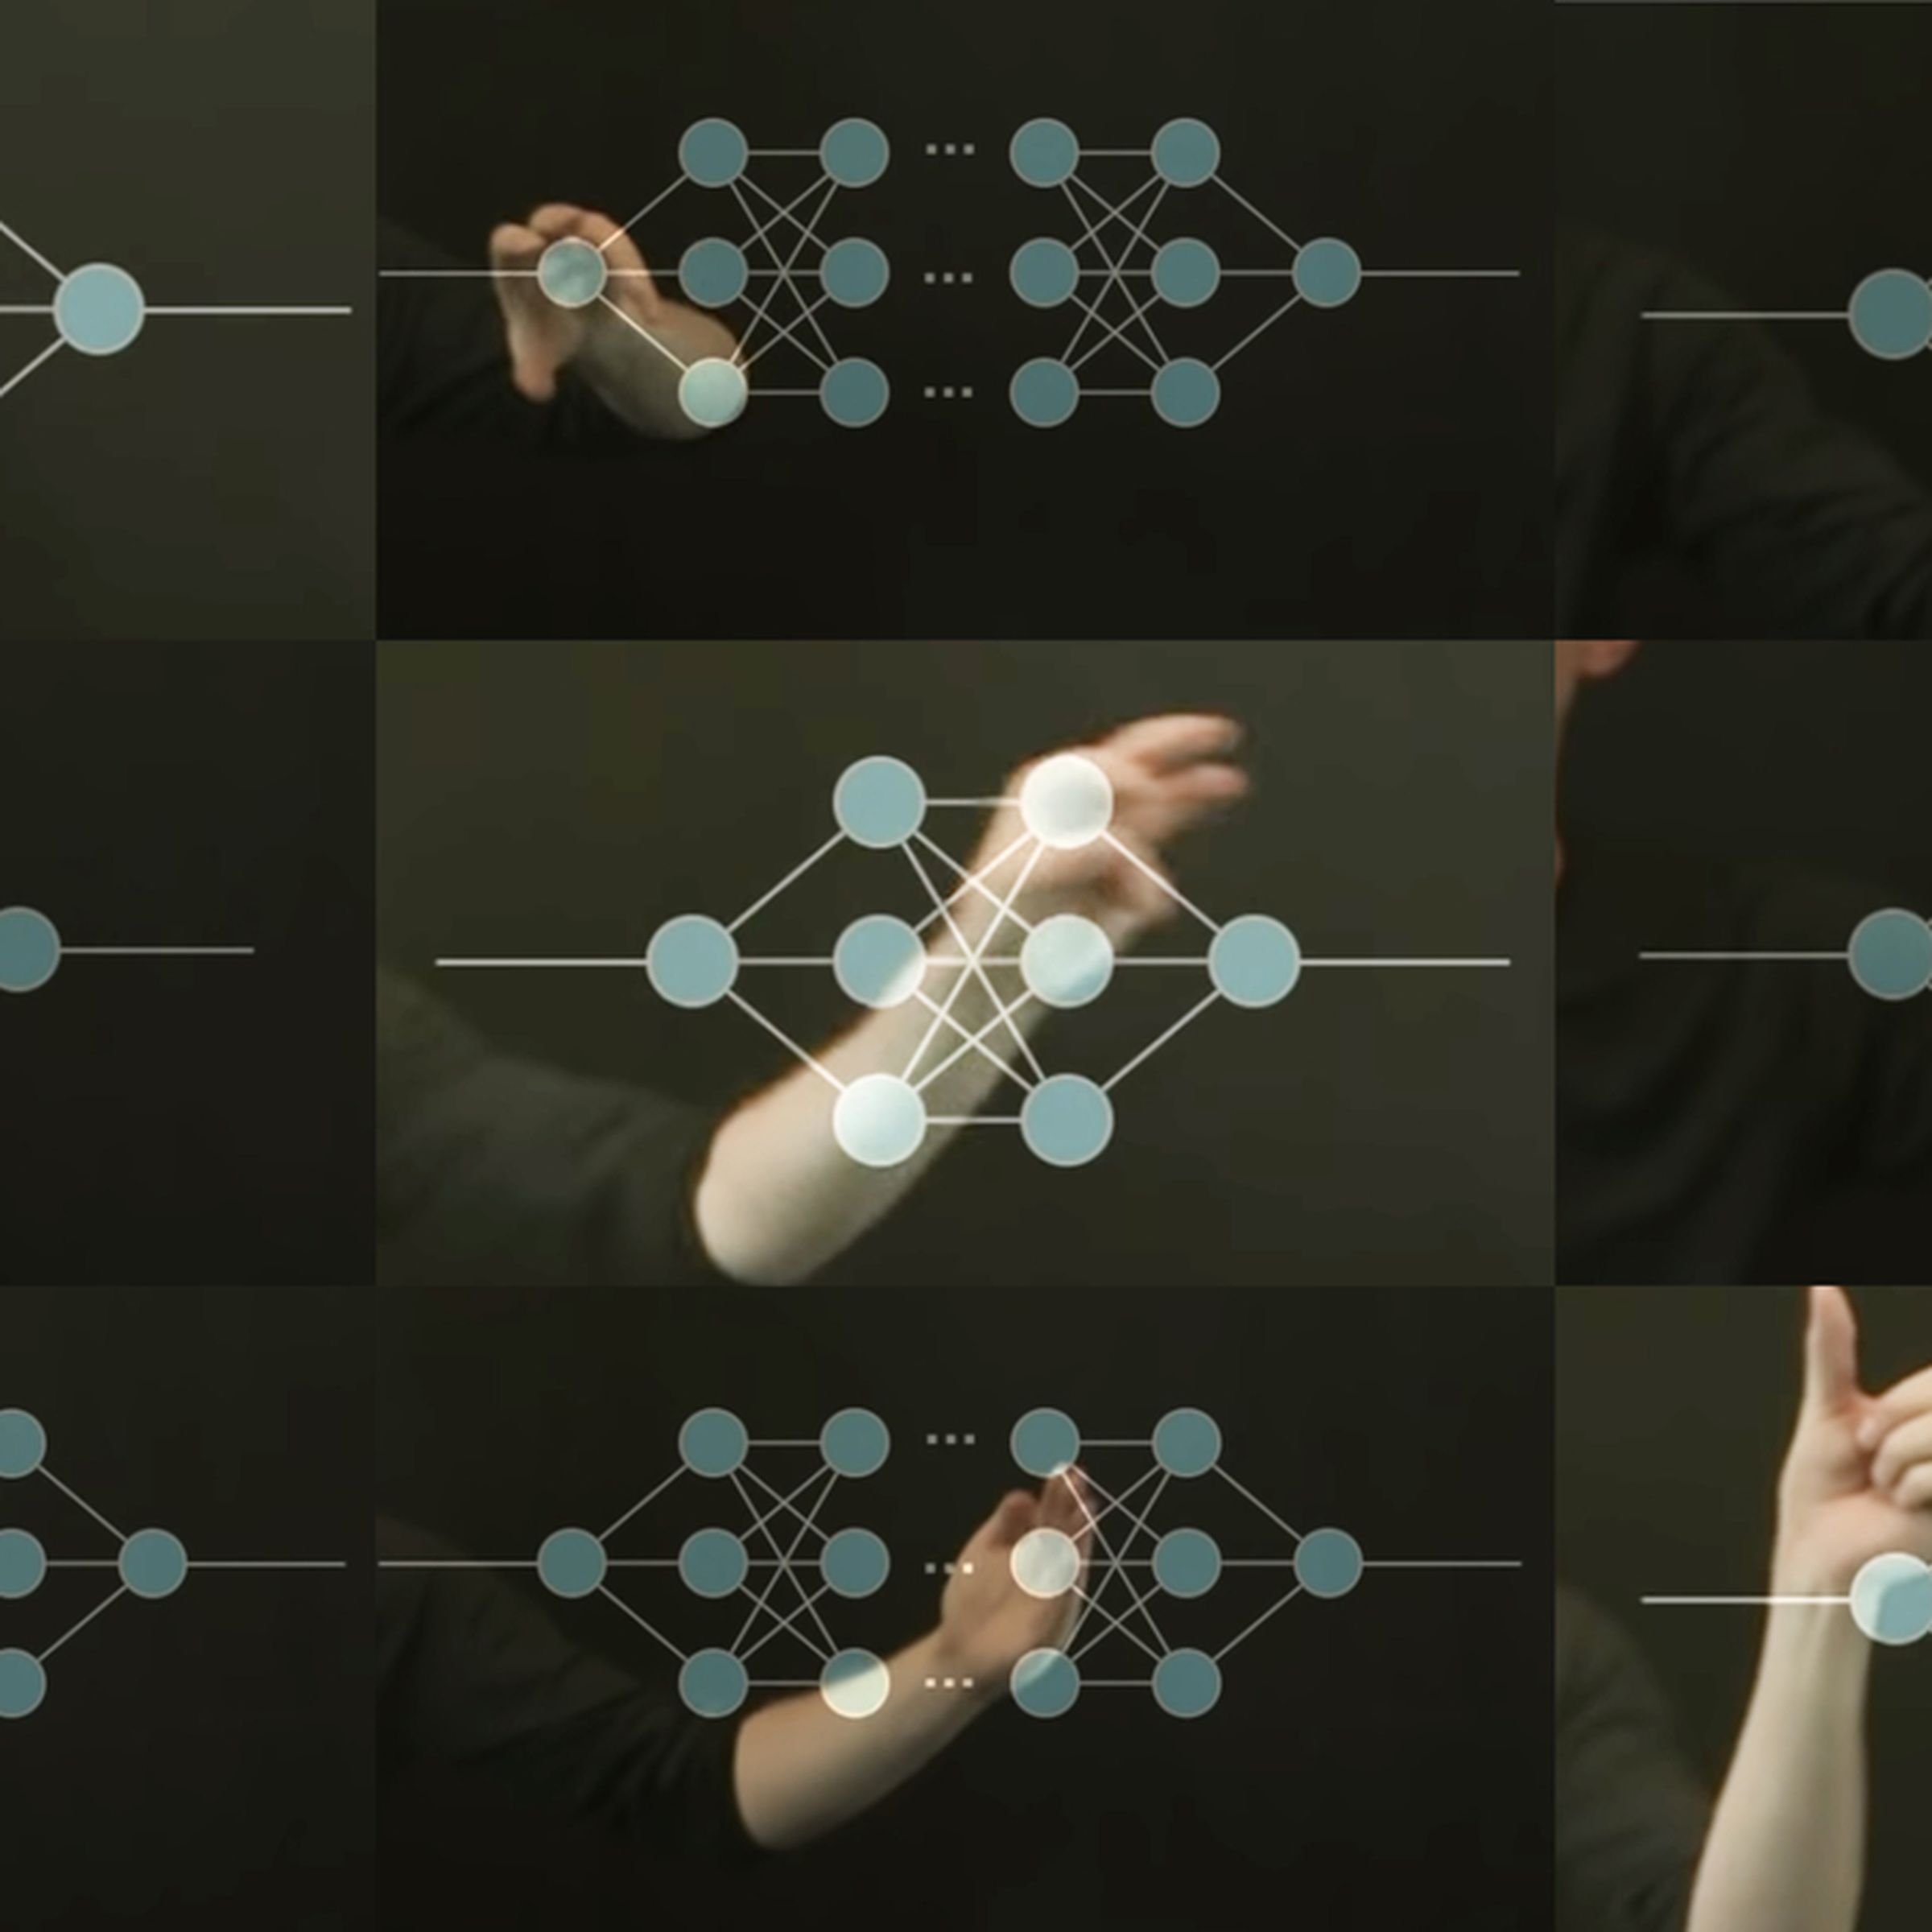 The image shows nine thumbnails of a hand in different poses overlaid by diagrams of a neural network. 